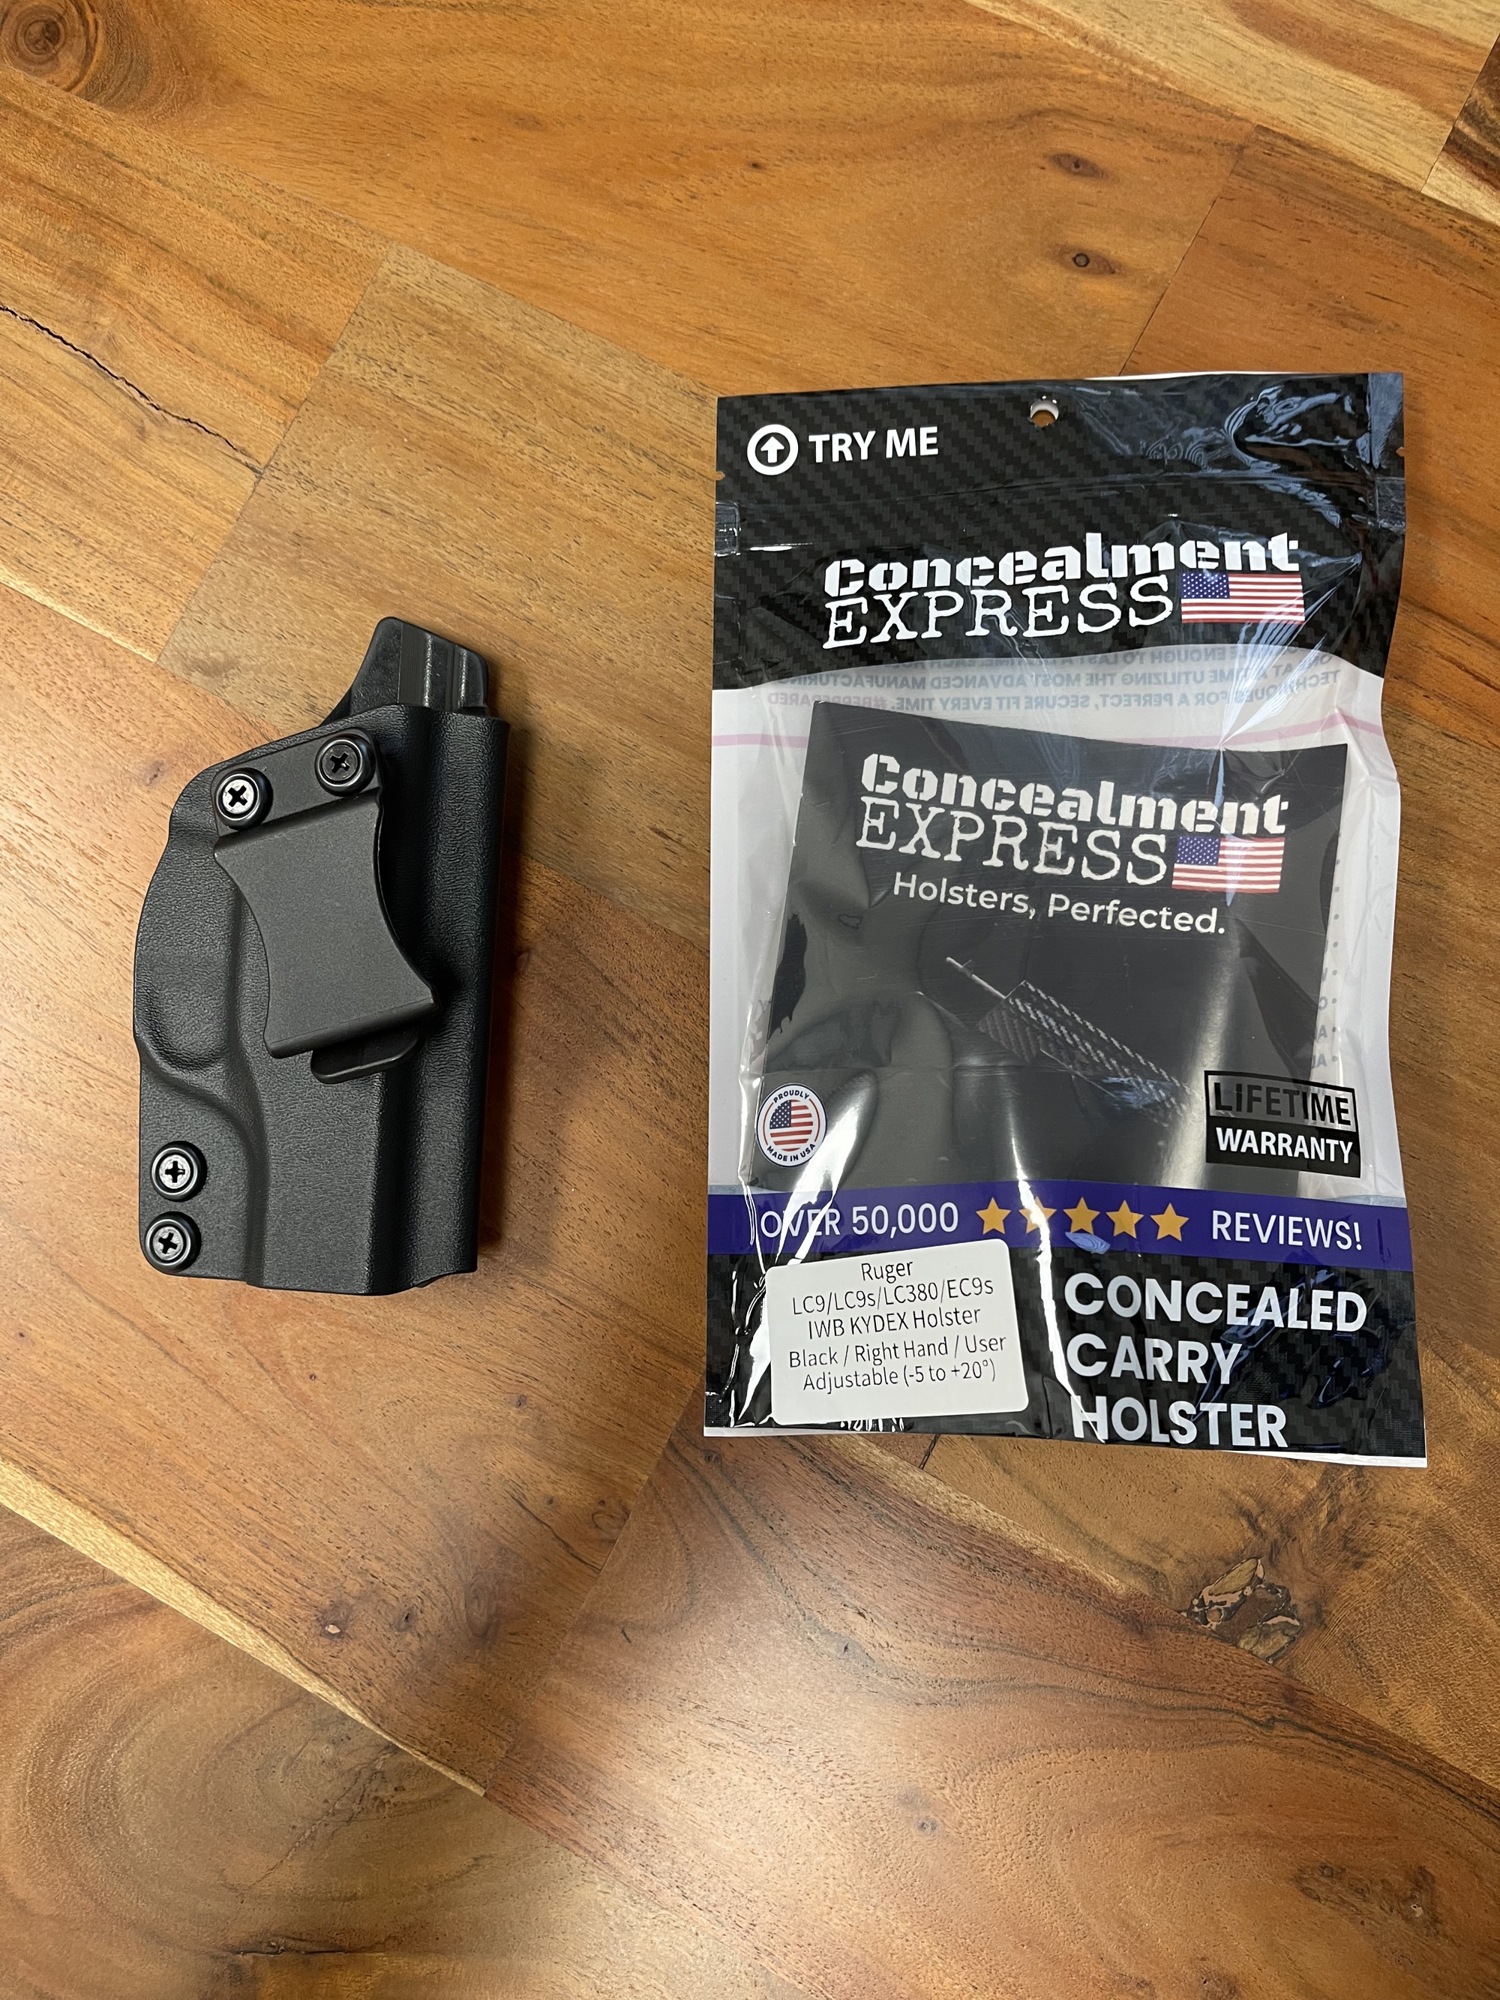 Concealment Express holsters are sold at 1,400 independent stores and 400 big-box retailers, including Academy Sports.